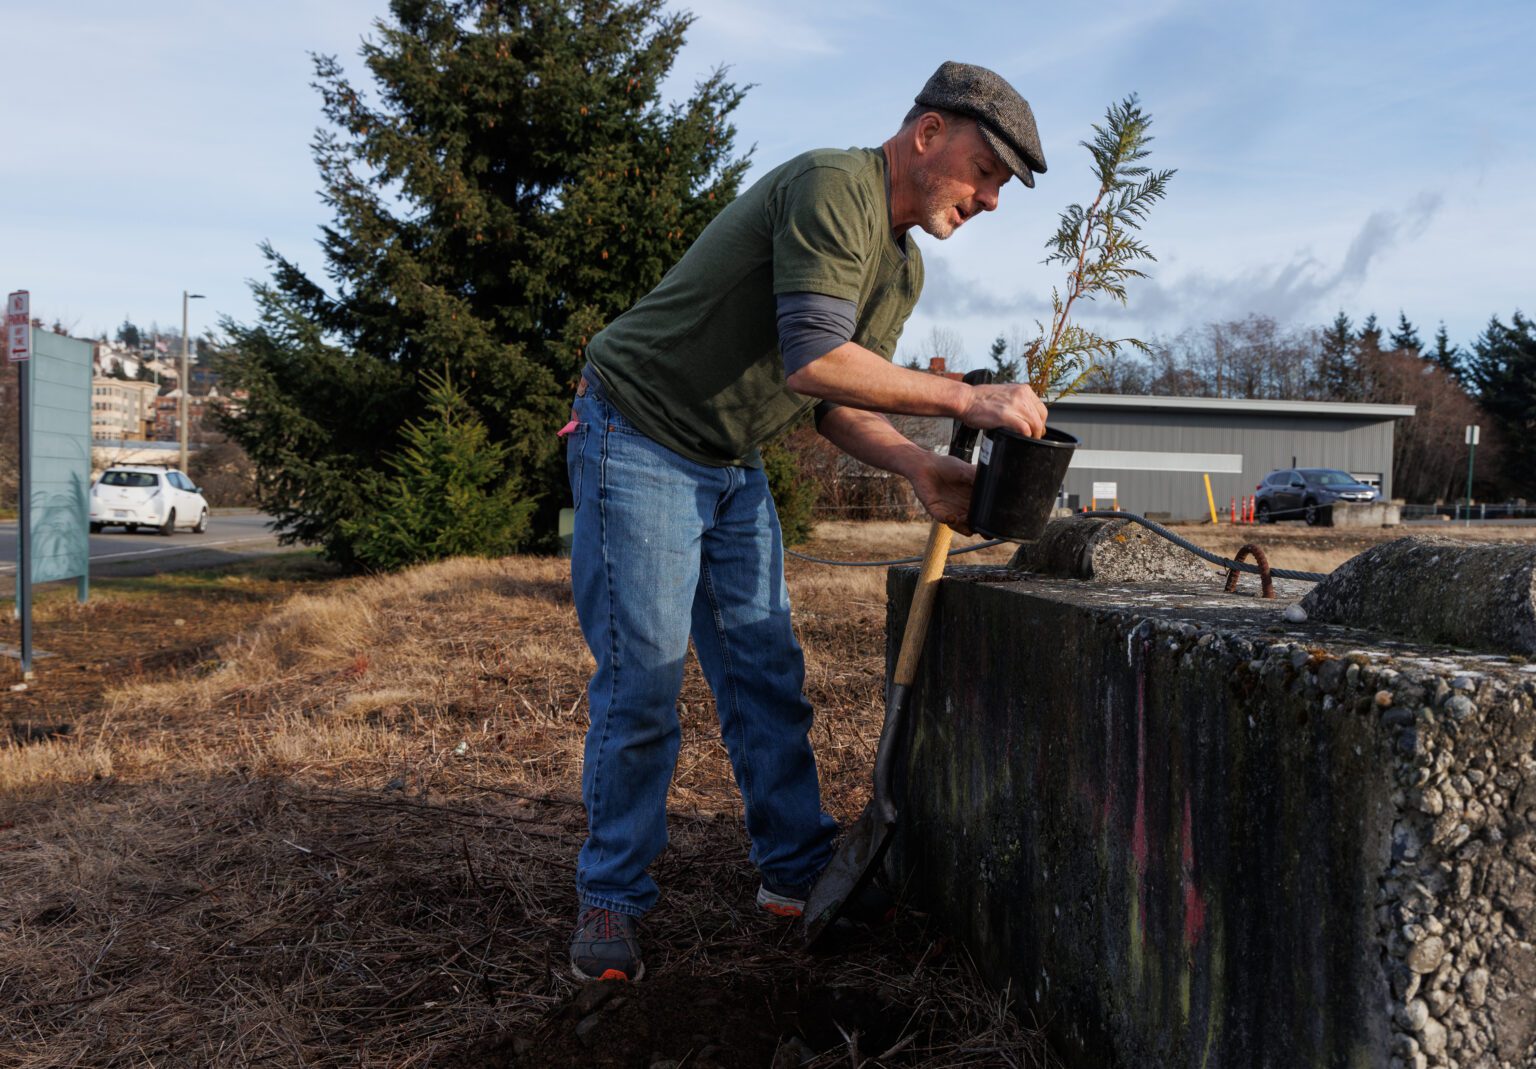 “Guerrilla Planter” Matt Christman plants Western redcedar trees along Harris Avenue on Saturday. Christman has been planting these "unauthorized" trees for decades. The Douglas fir behind him